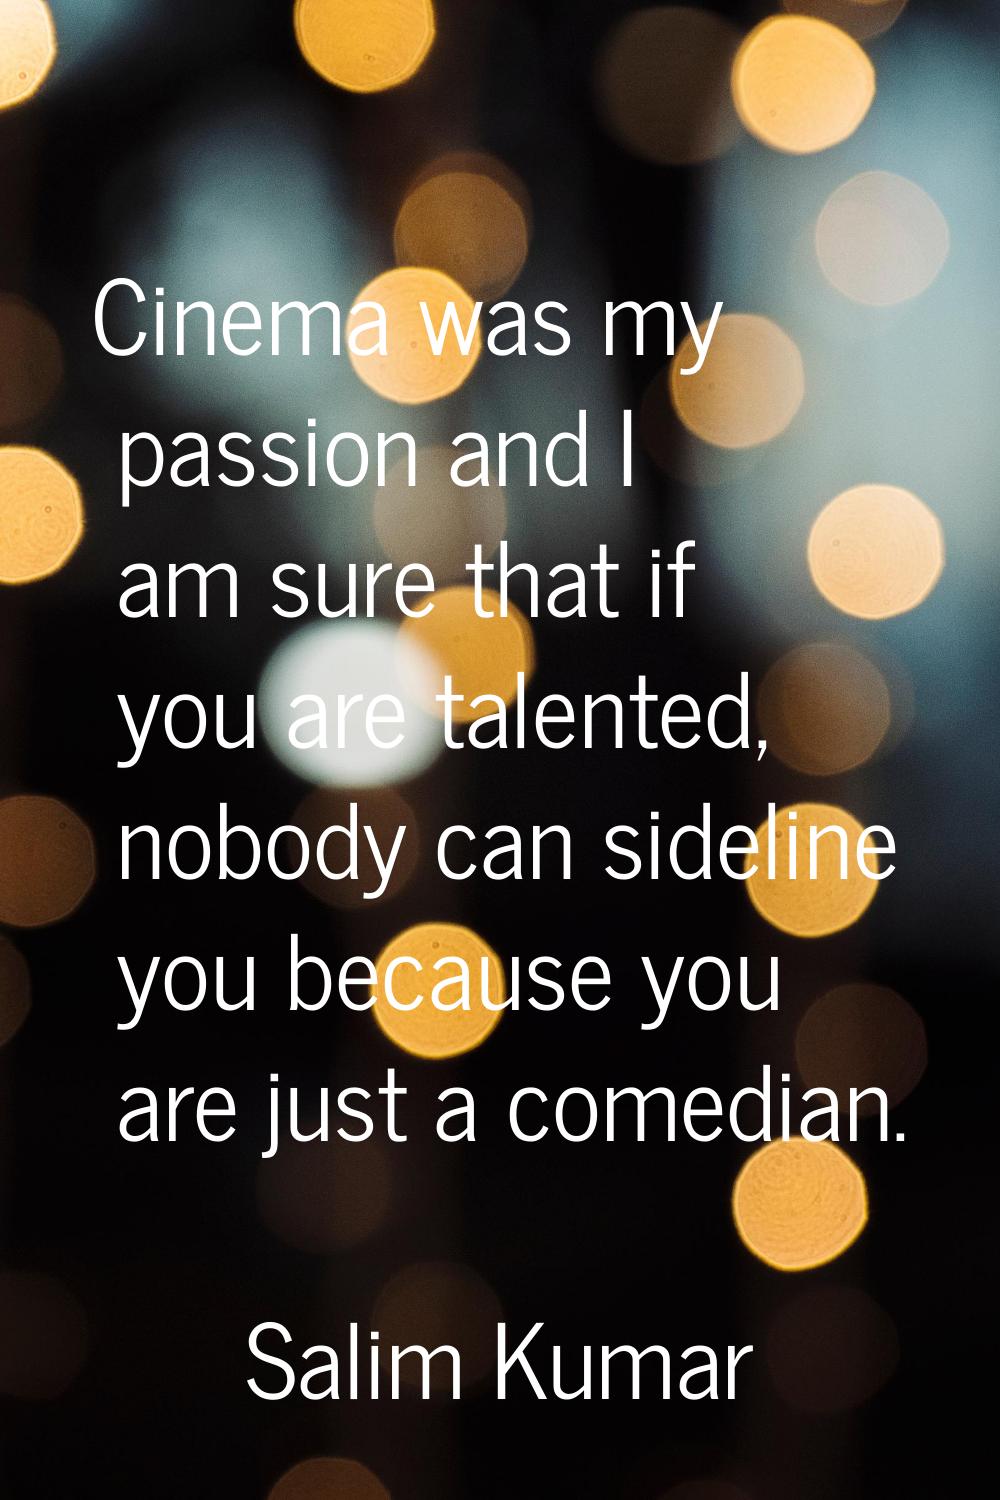 Cinema was my passion and I am sure that if you are talented, nobody can sideline you because you a